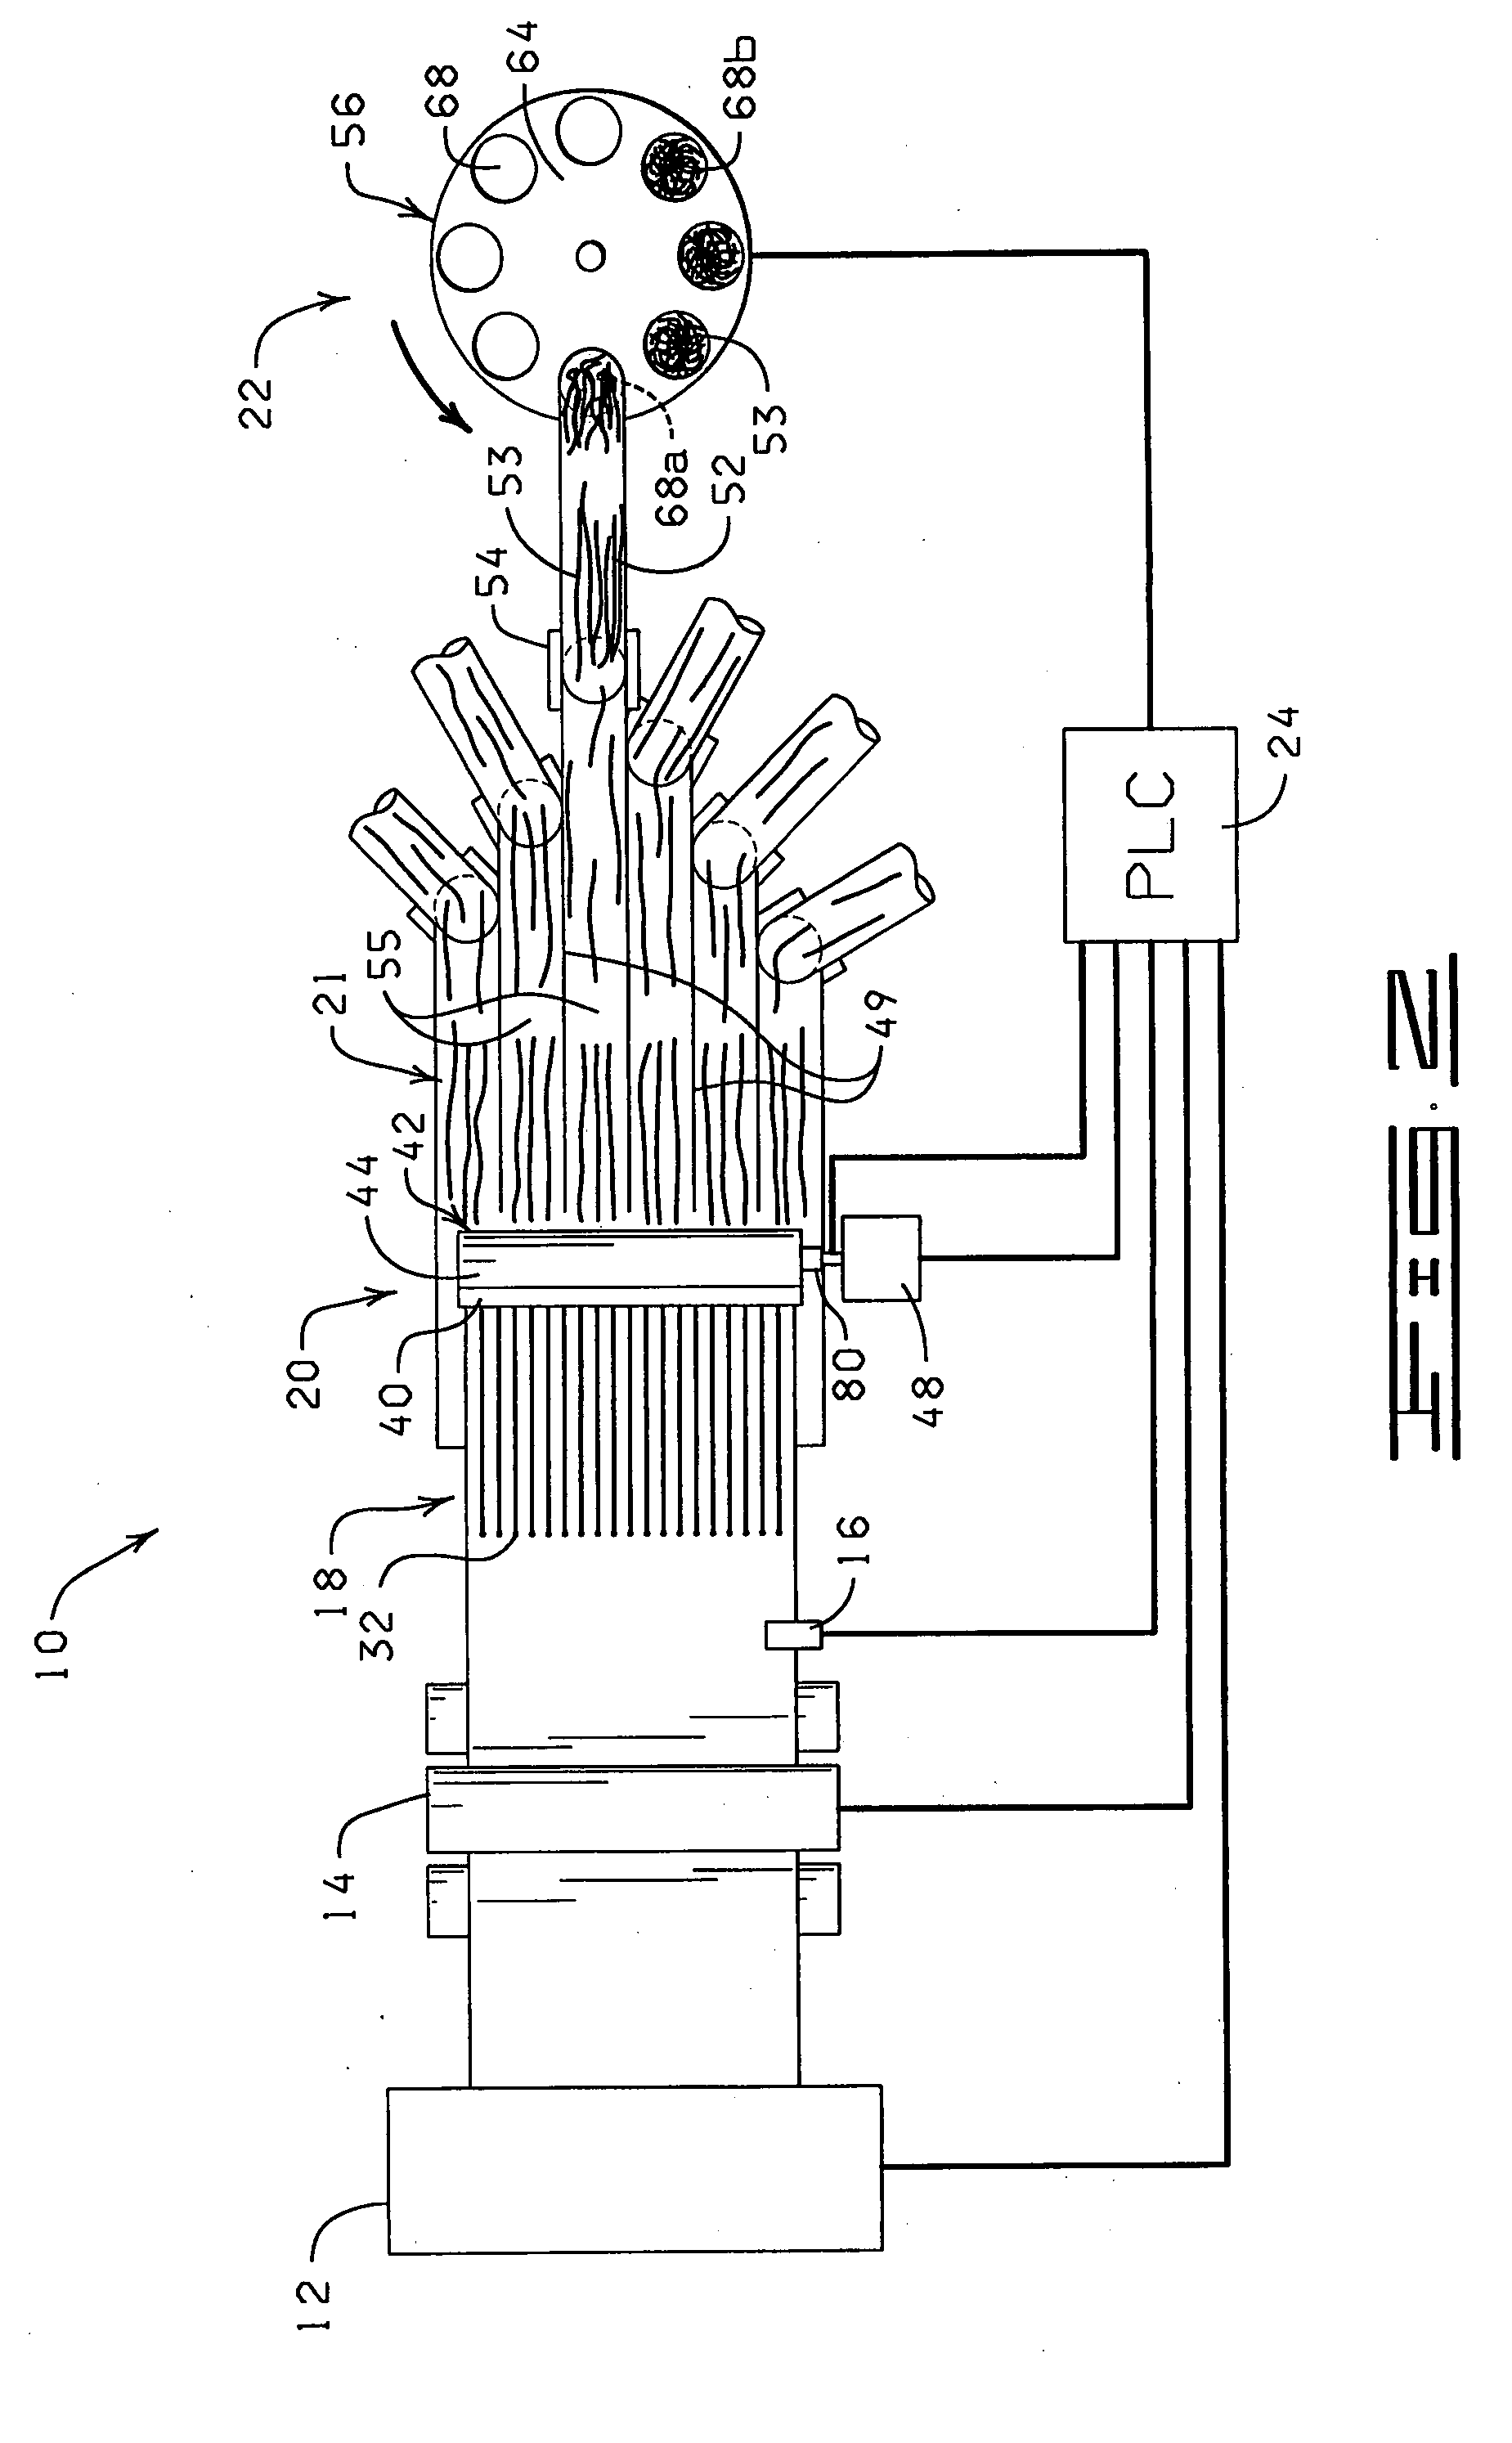 Apparatus and method for making and bagging decorative grass